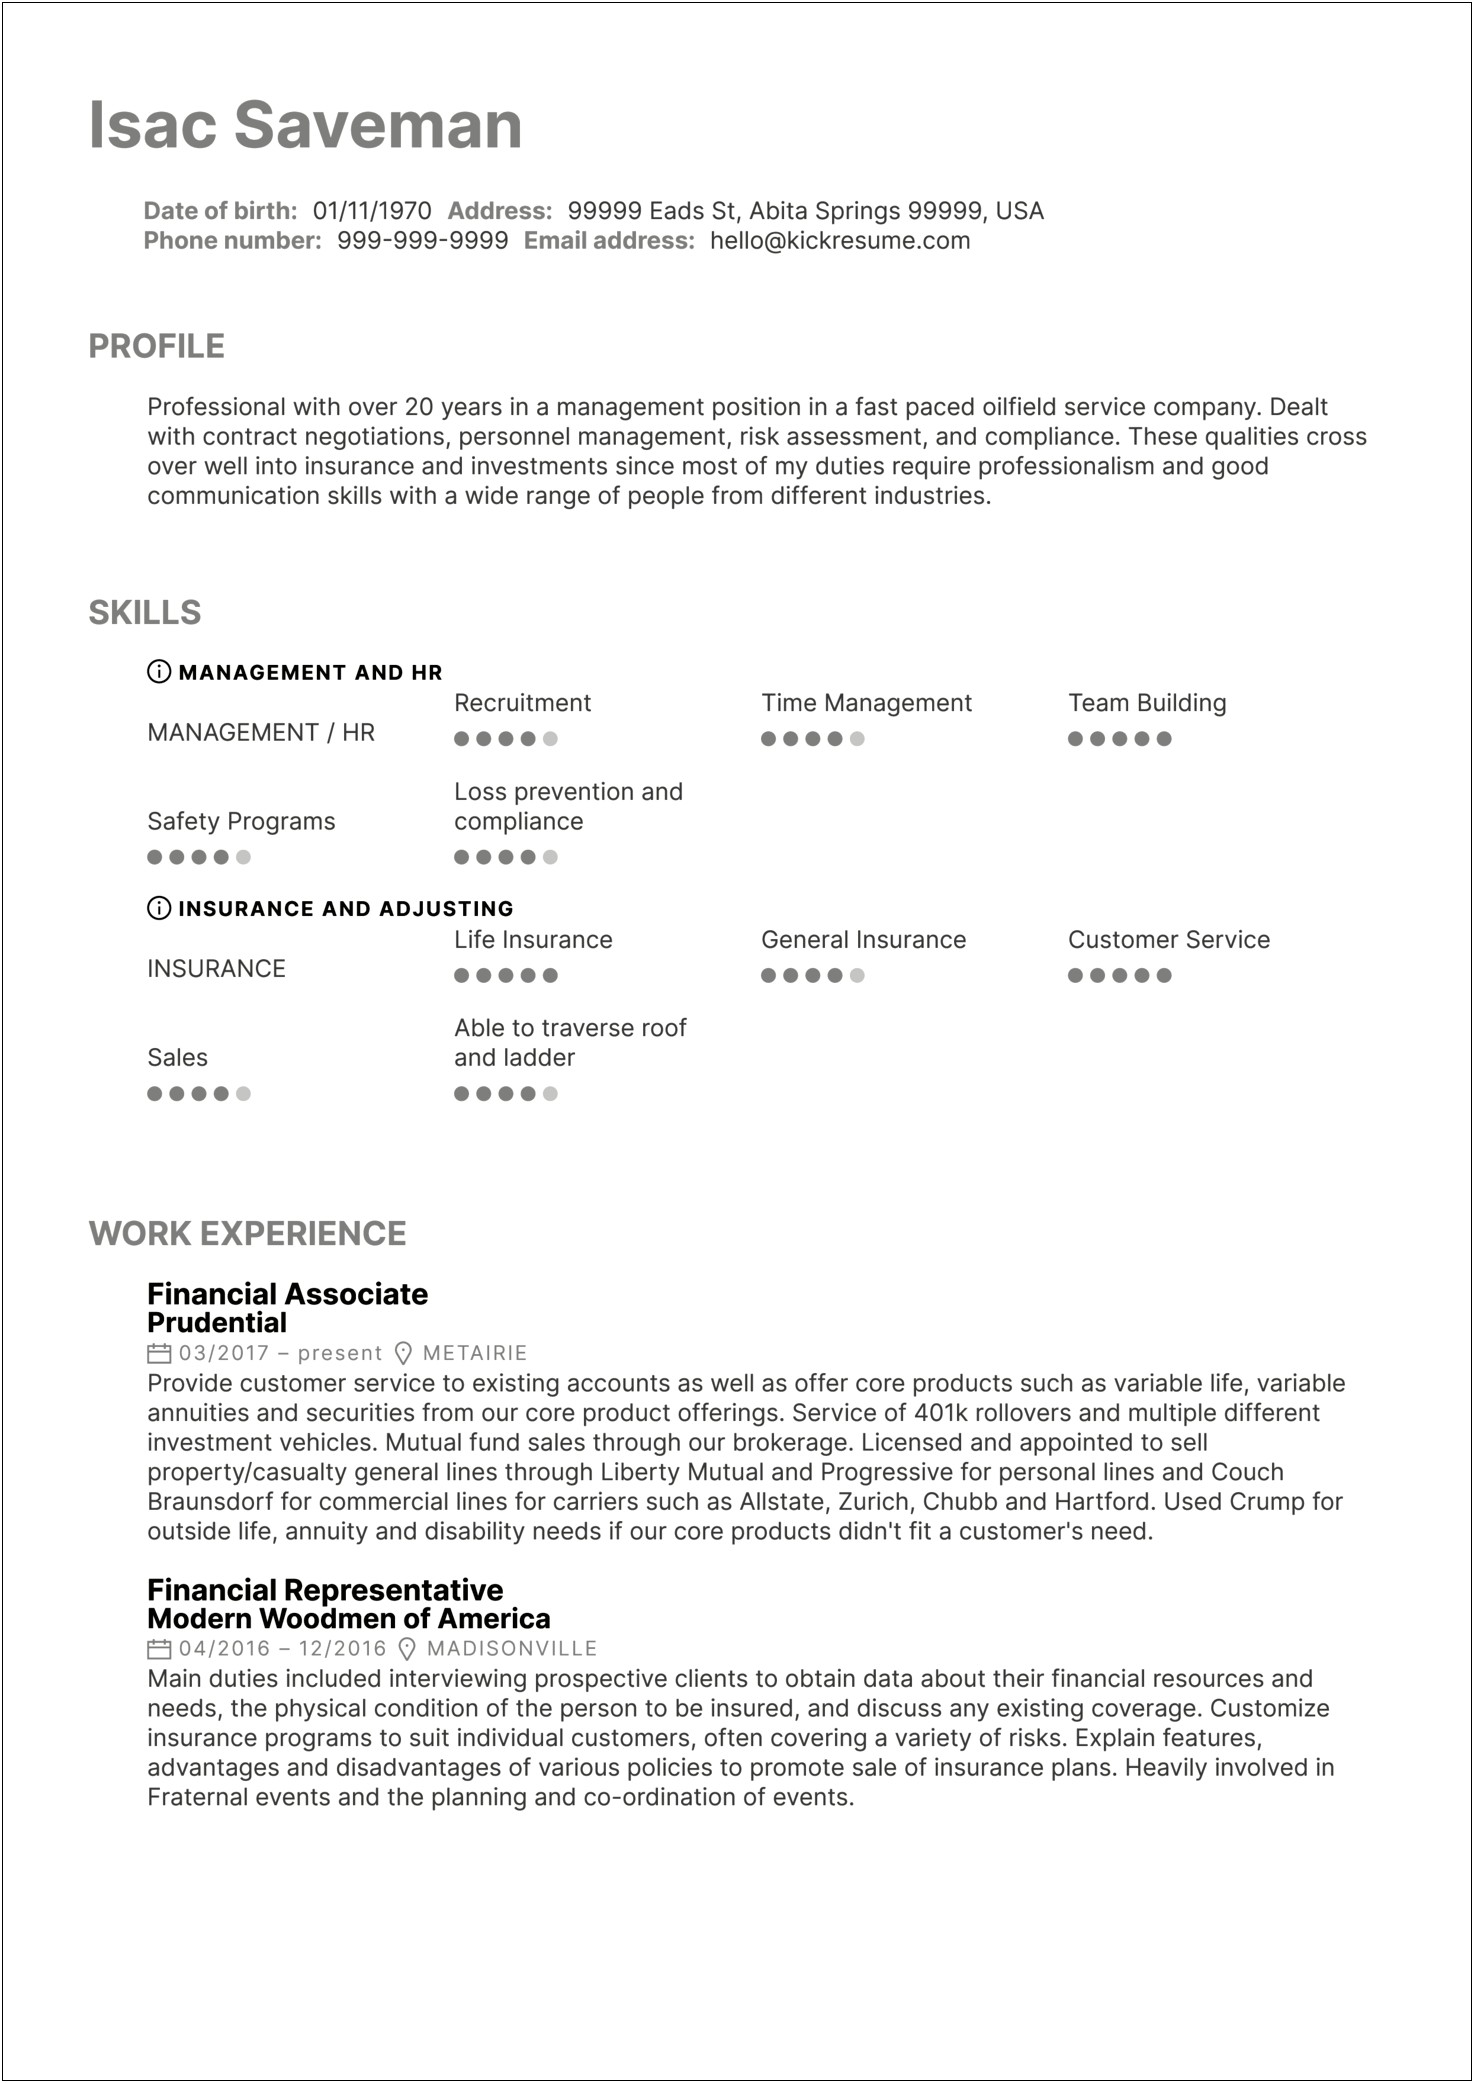 Personal Lines Producer Resume Sample